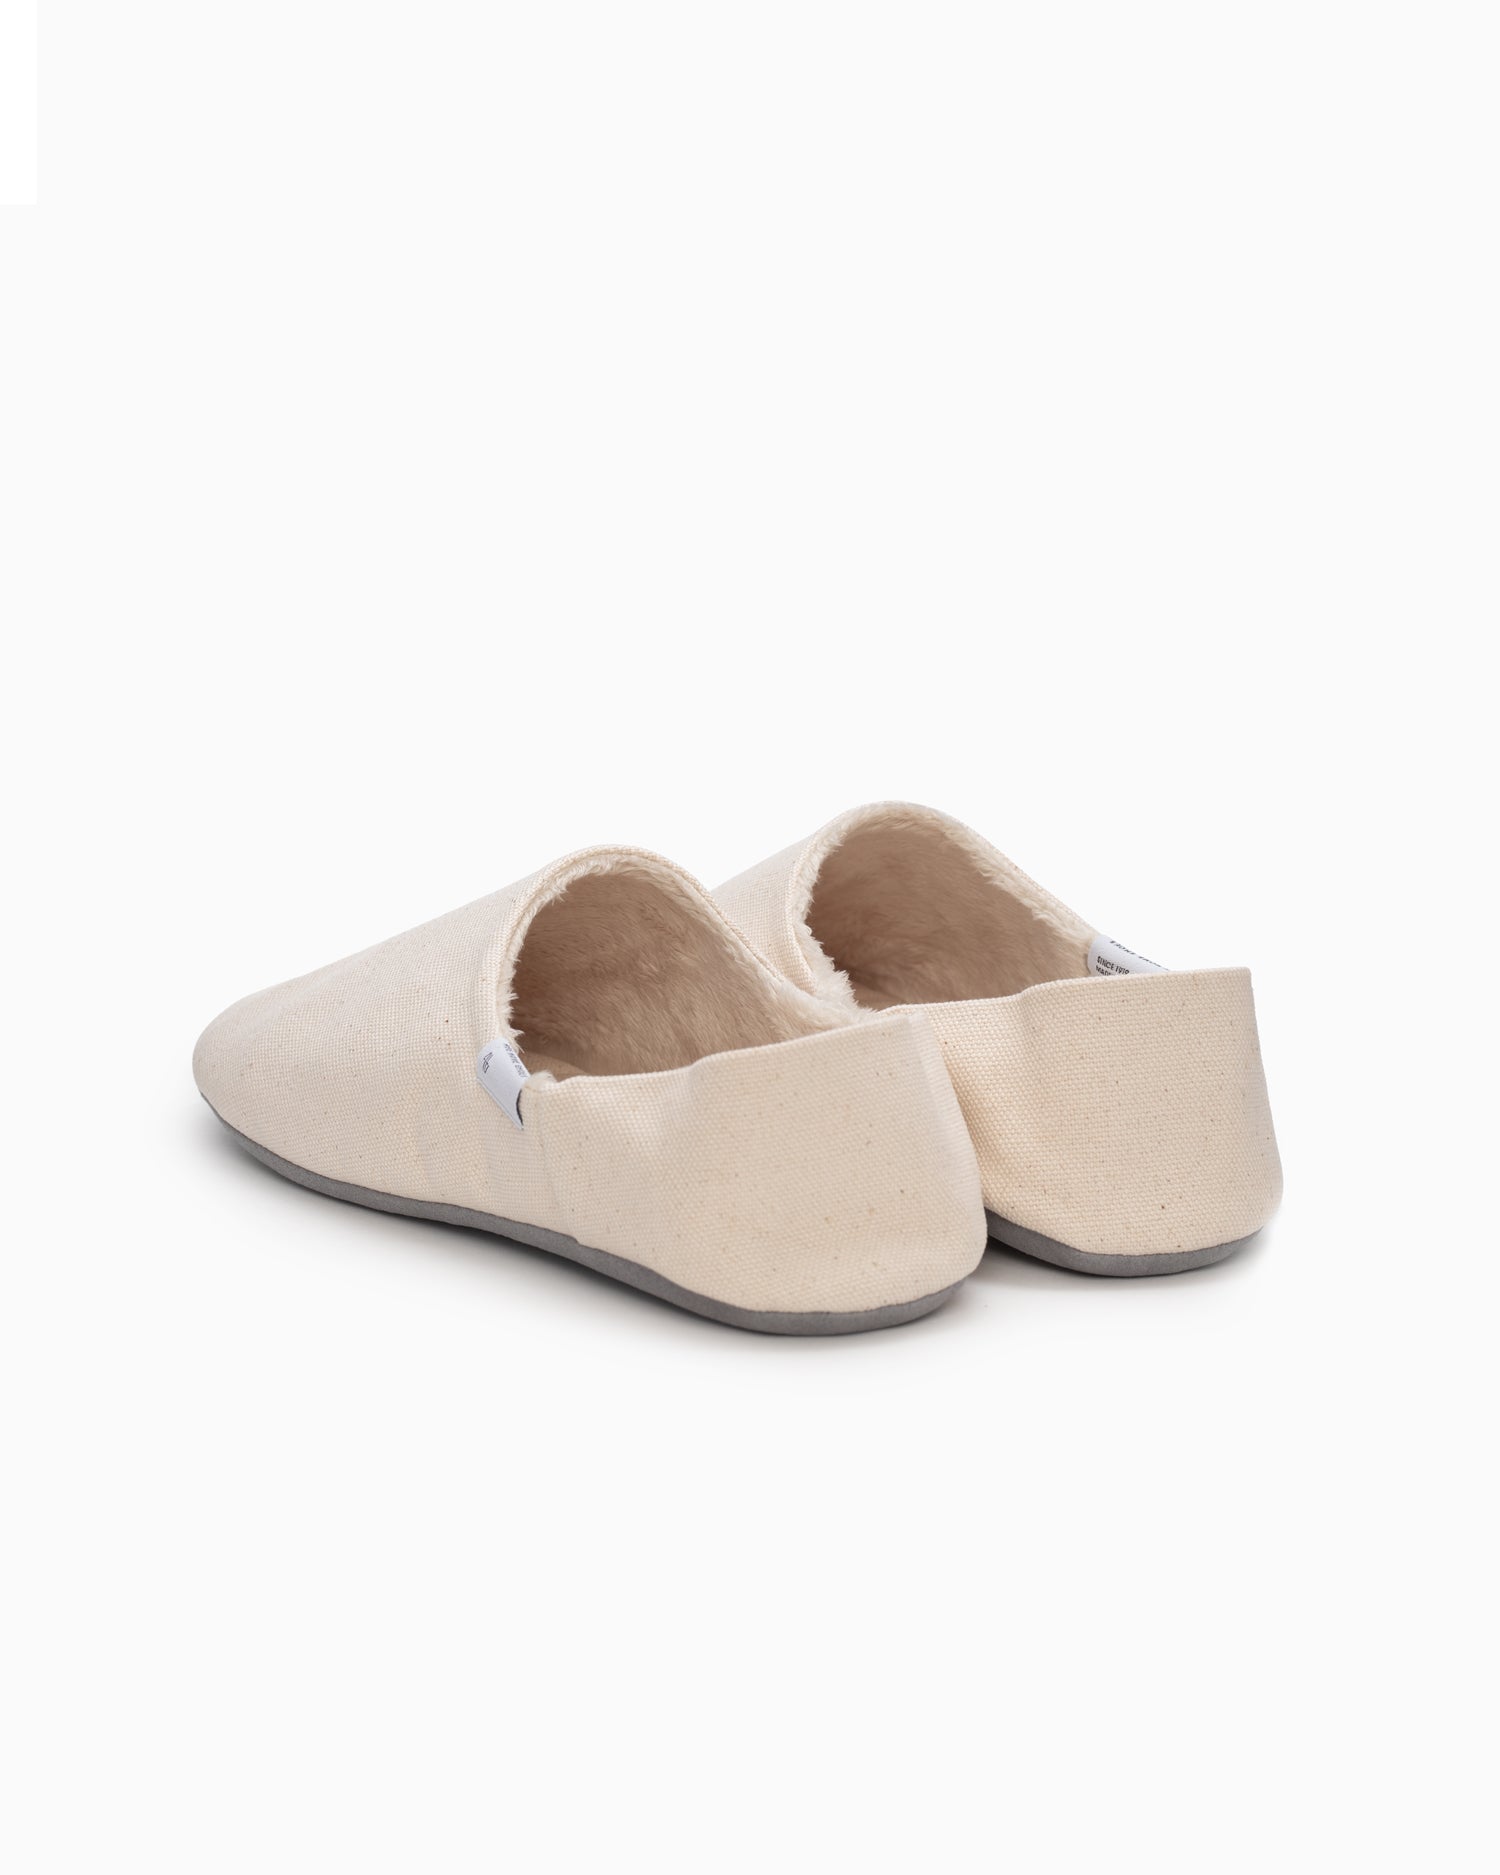 Wool Lined Canvas Room Shoes - Linen